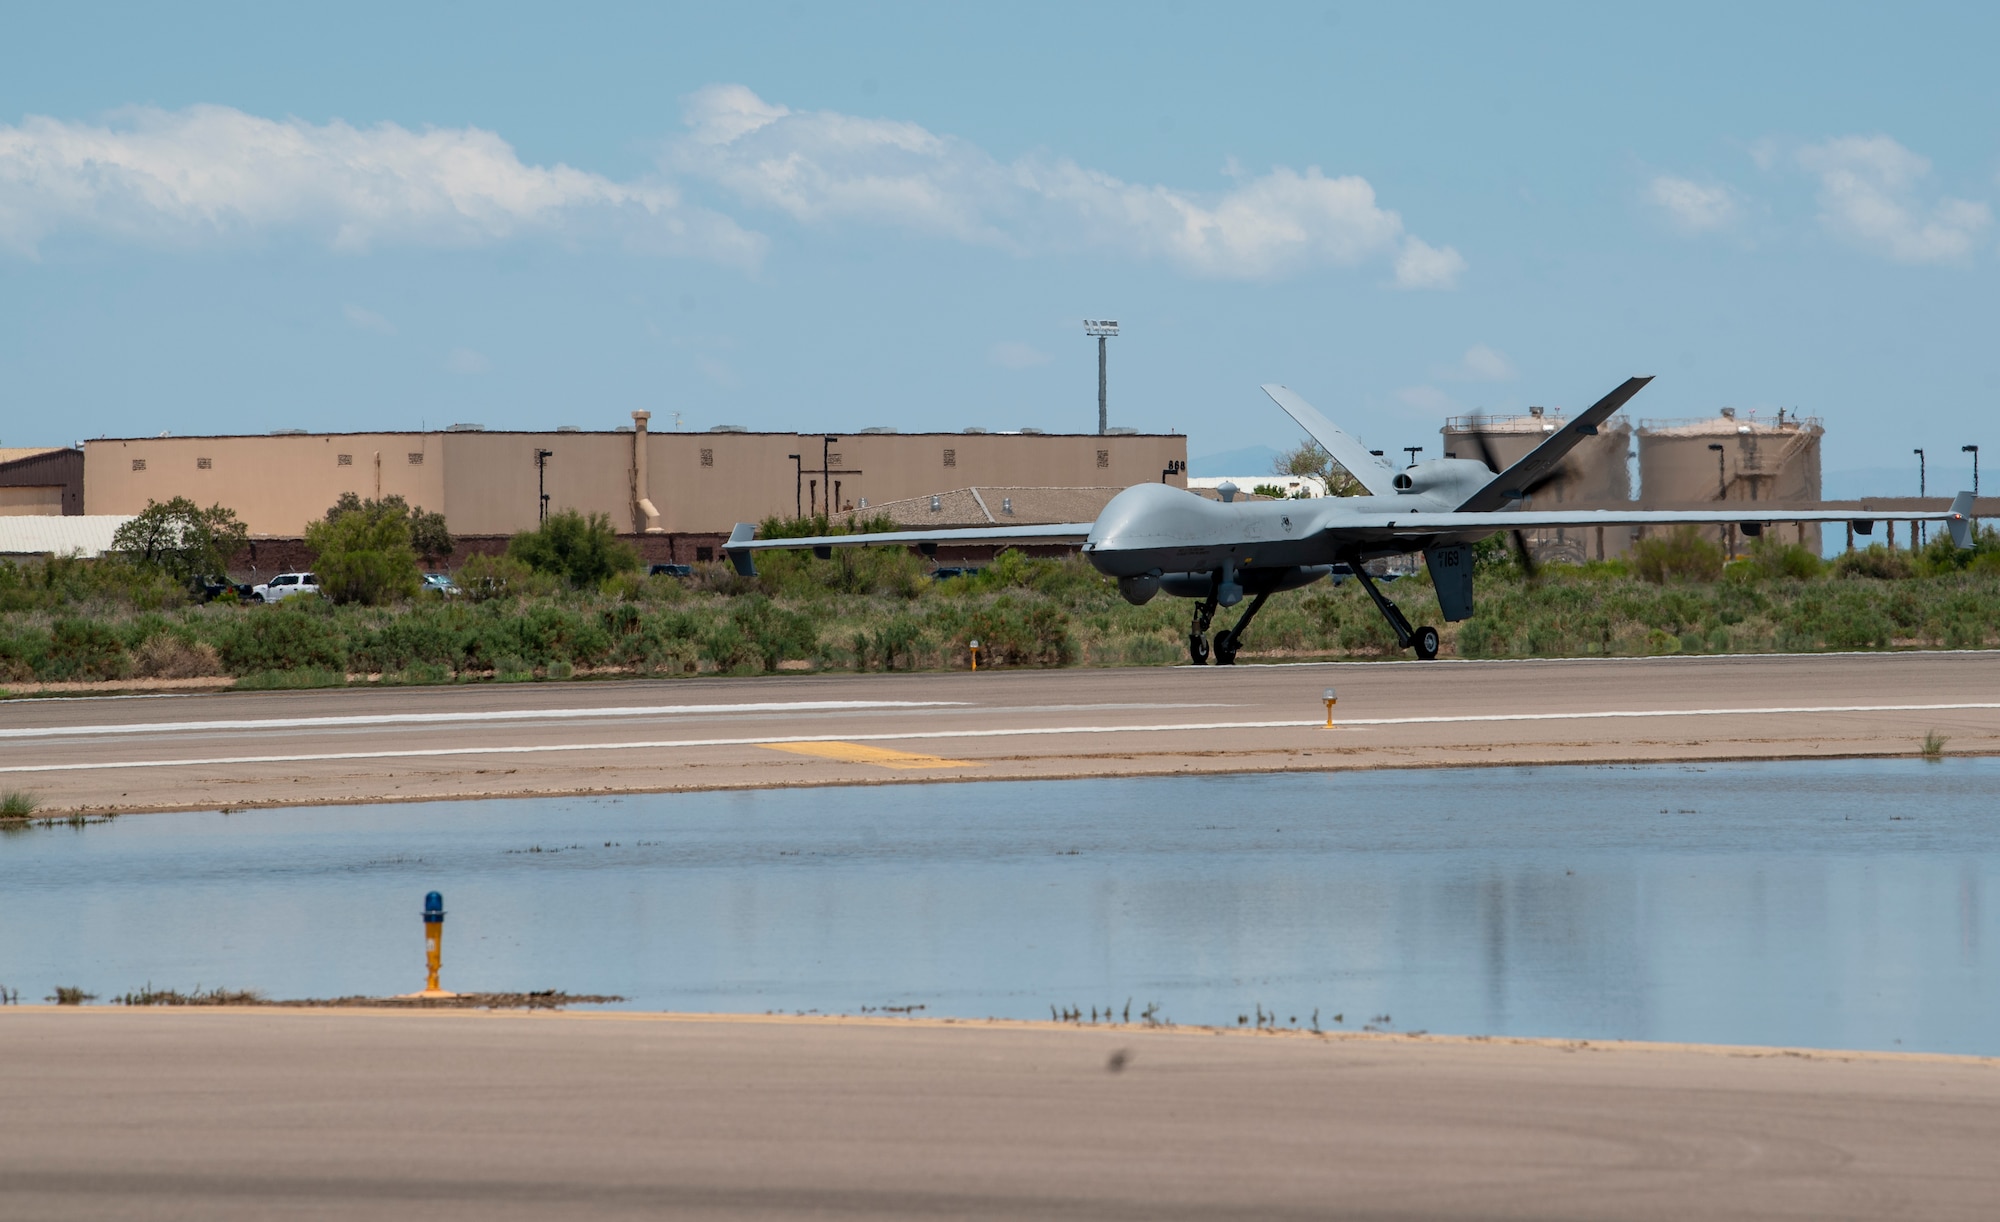 An MQ-9 Reaper from Creech Air Force Base, Nevada, lands at Holloman AFB, New Mexico, July 8, 2021. This is the first time an MQ-9 arrived at HAFB from a different base using a new automated landing and takeoff system without an aircrew. (U.S. Air Force photo by Airman 1st Class Jessica Sanchez)